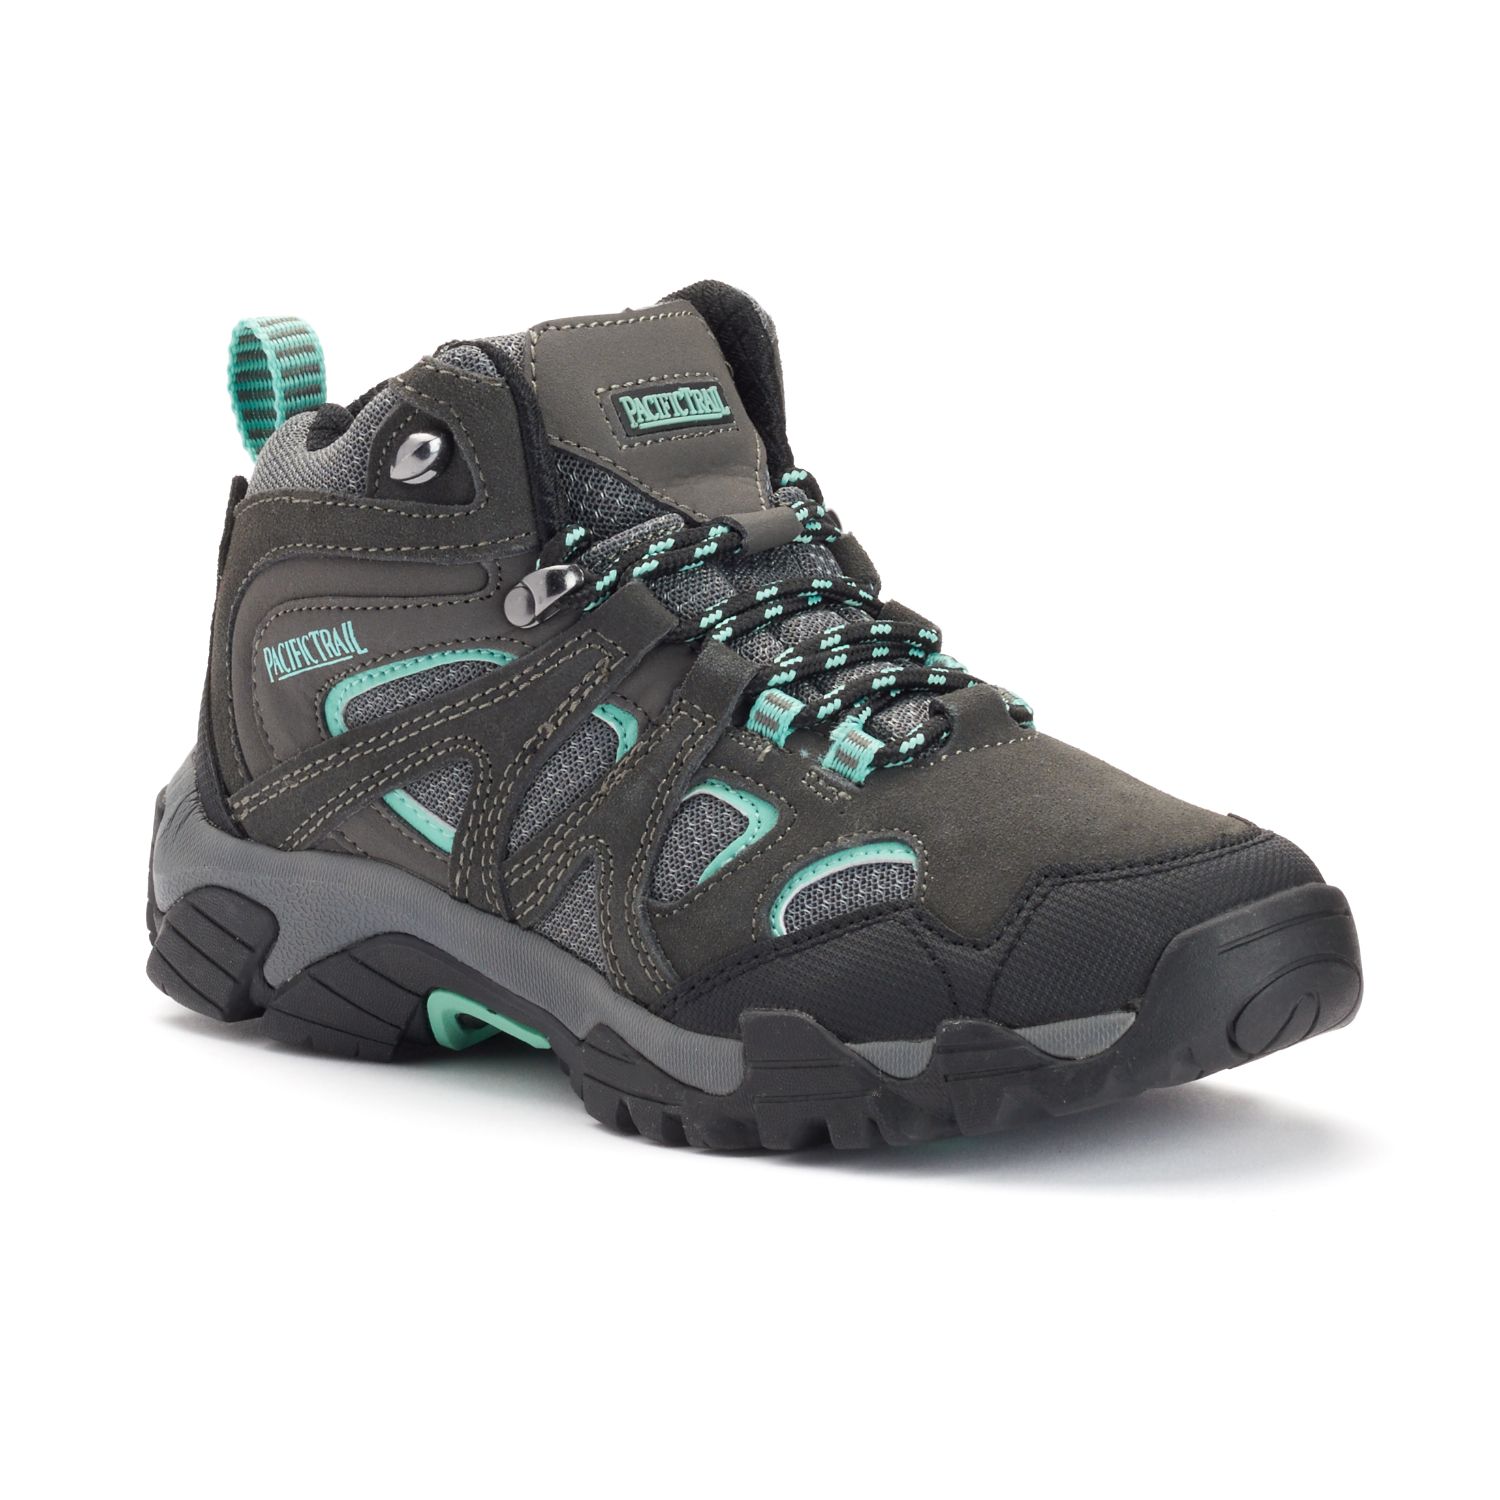 pacific trail diller hiking boots